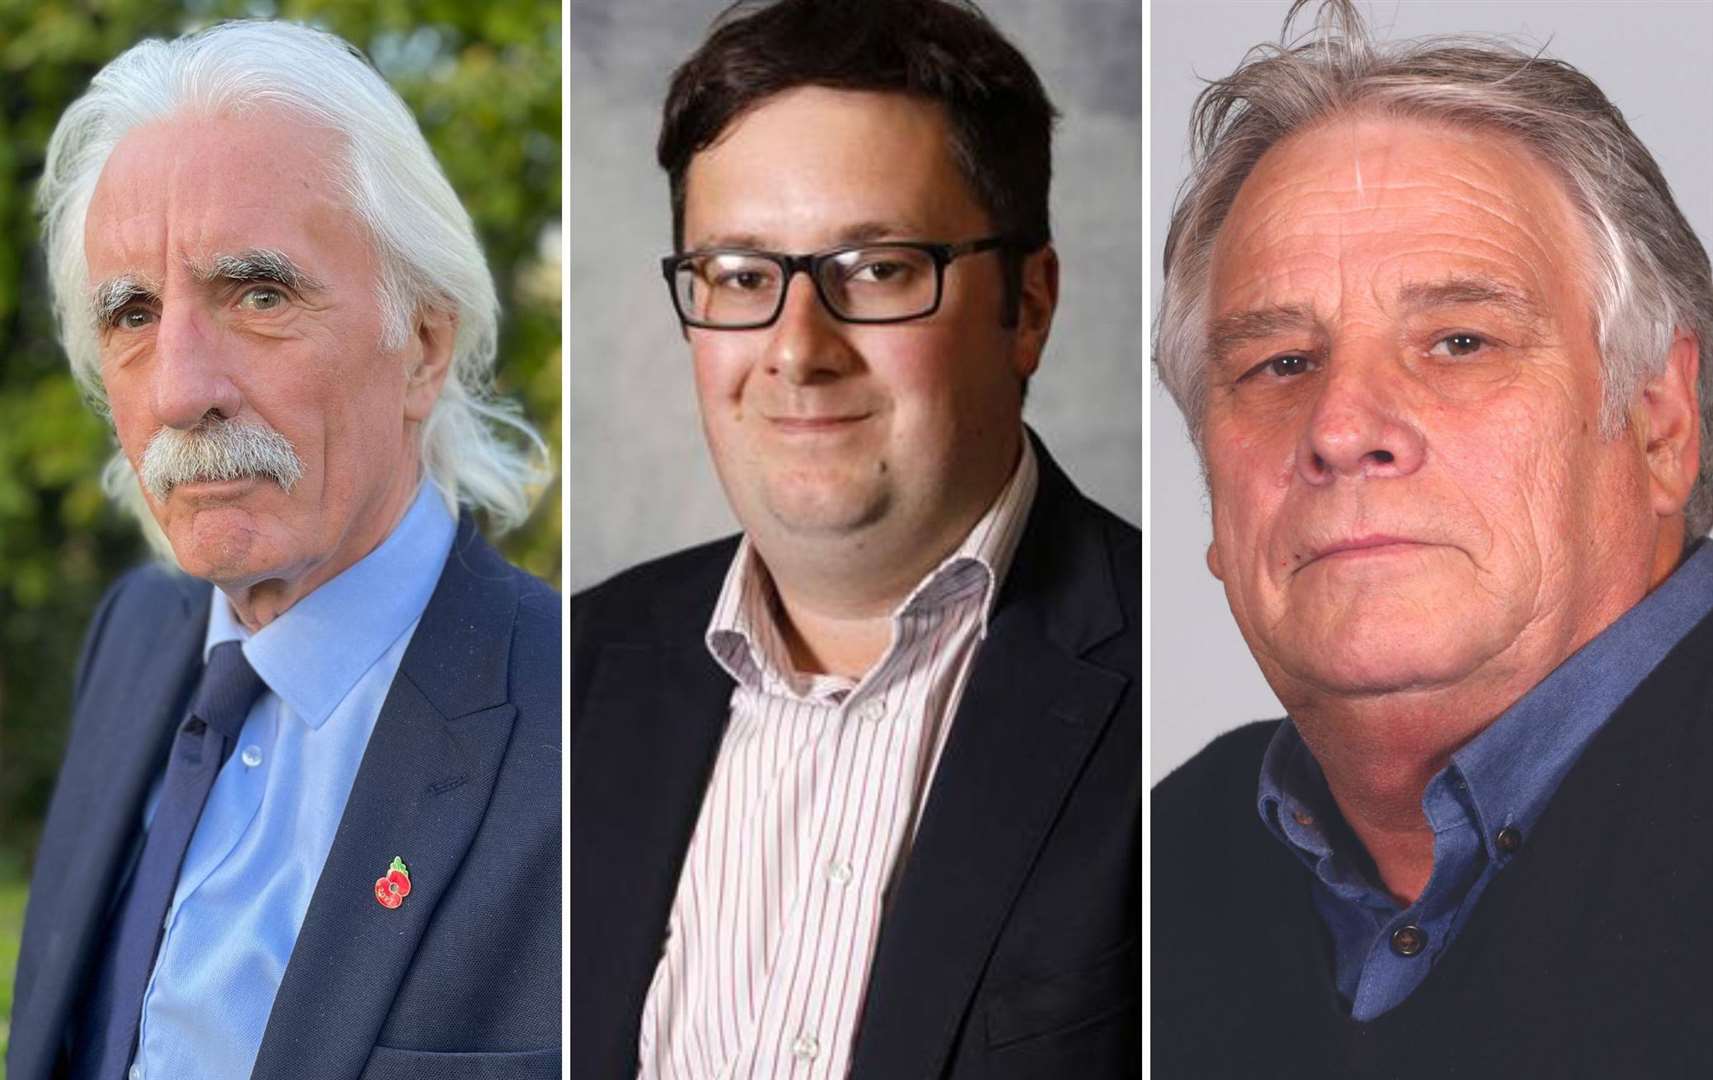 Independent councillors want to know why work is starting before the next stage of Medway’s Local Plan consultation